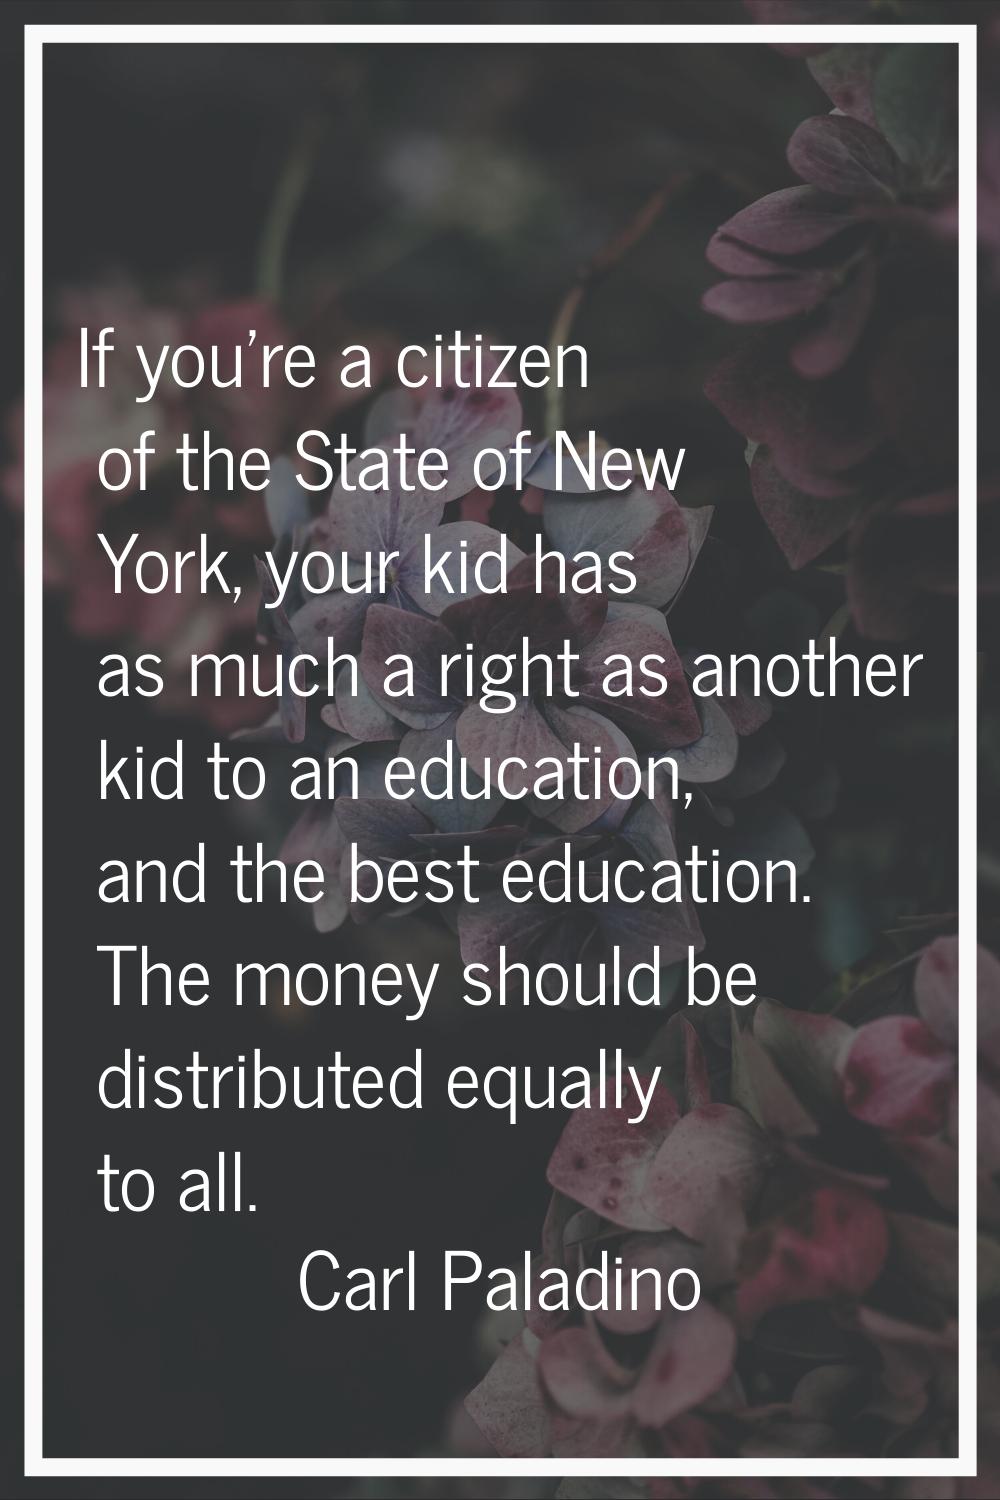 If you're a citizen of the State of New York, your kid has as much a right as another kid to an edu